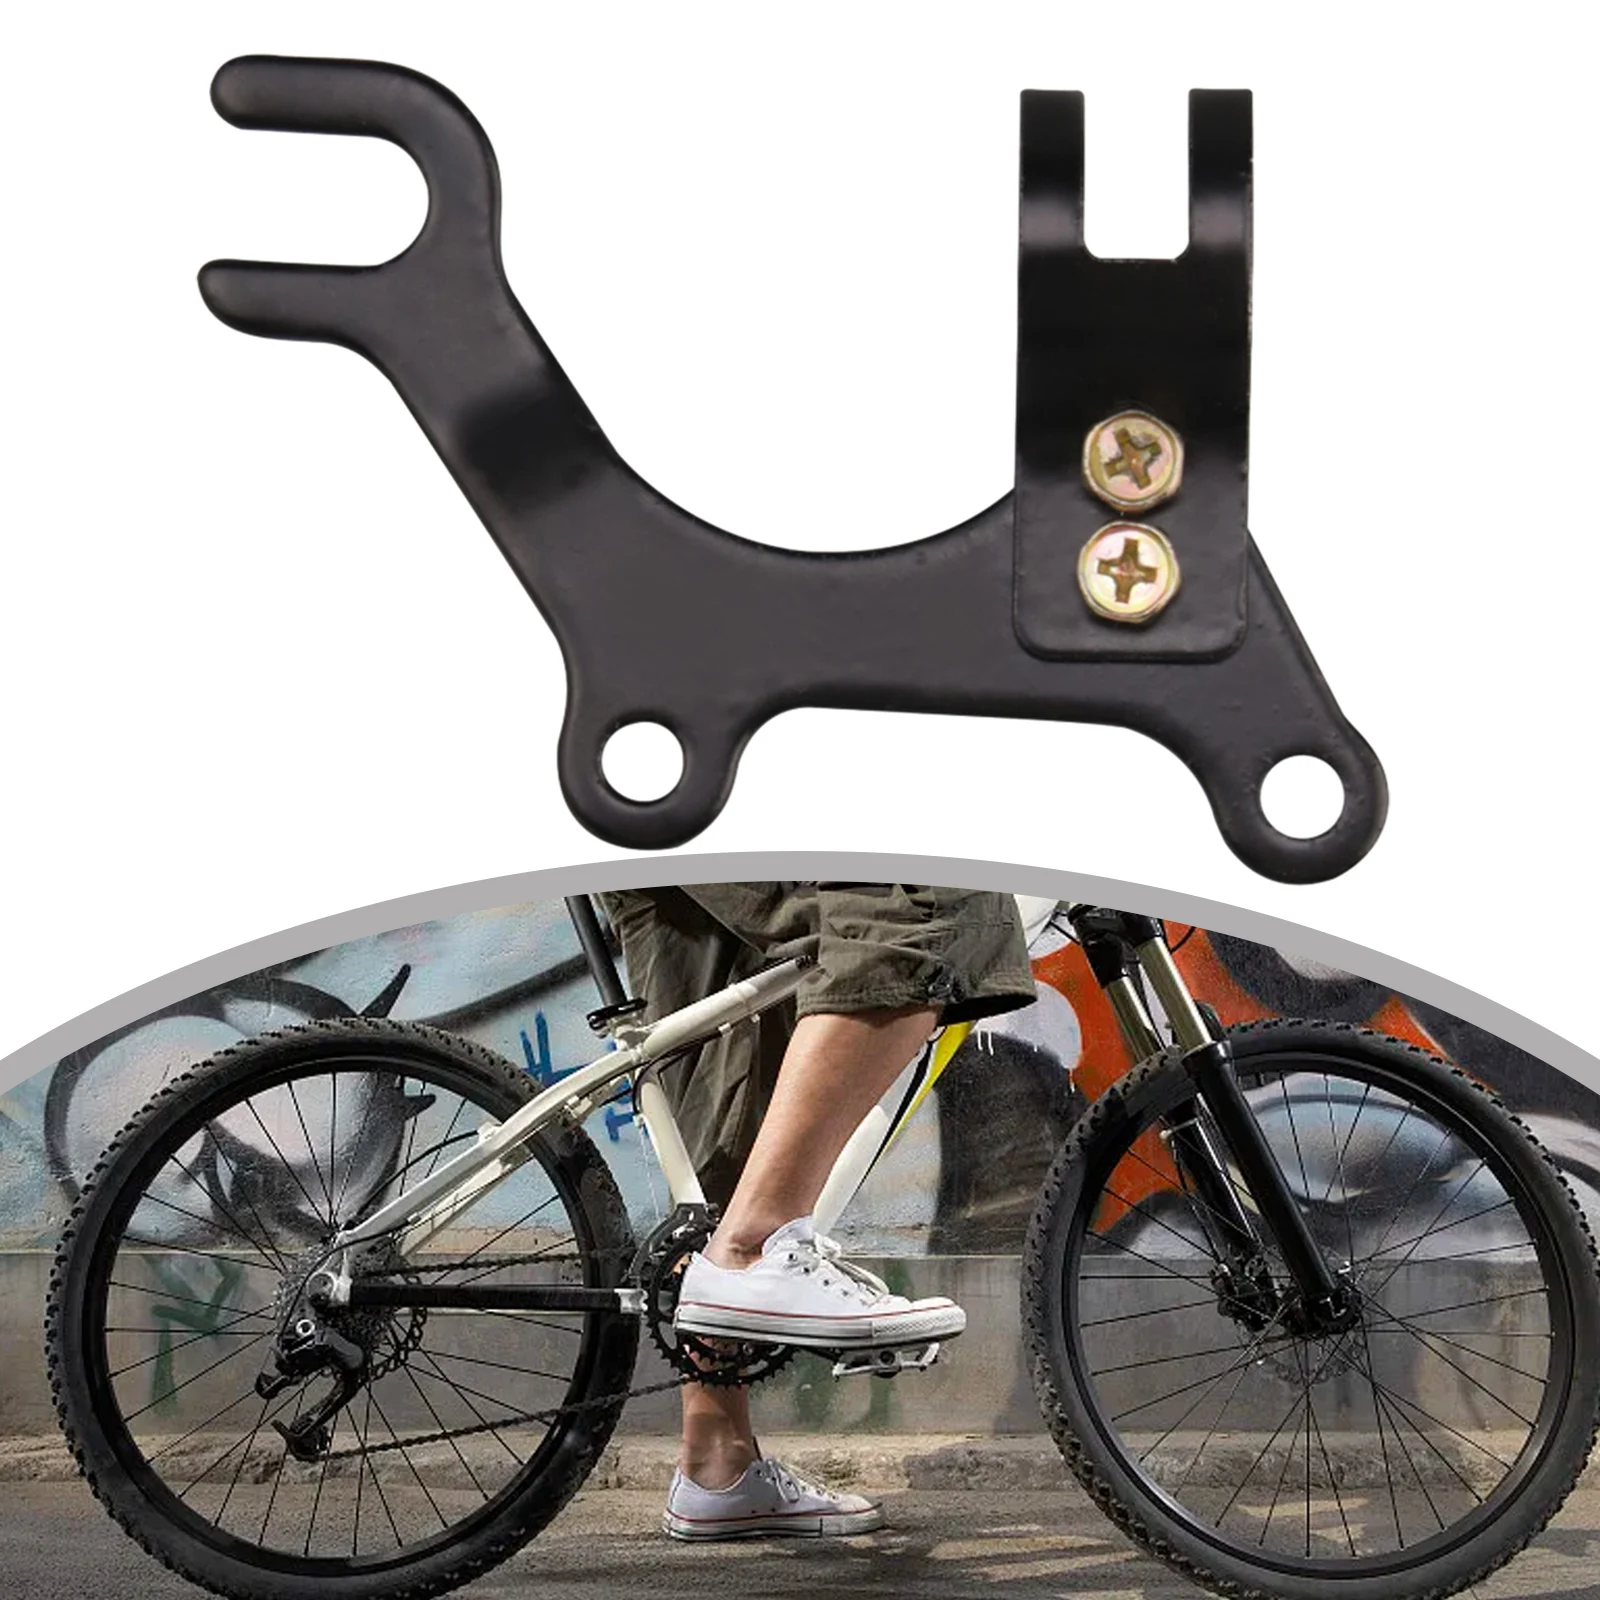 

Transform Your Normal Bike into a Disc Brake Bike with Ease Stainless Steel Bracket for Easy Installation and Removal